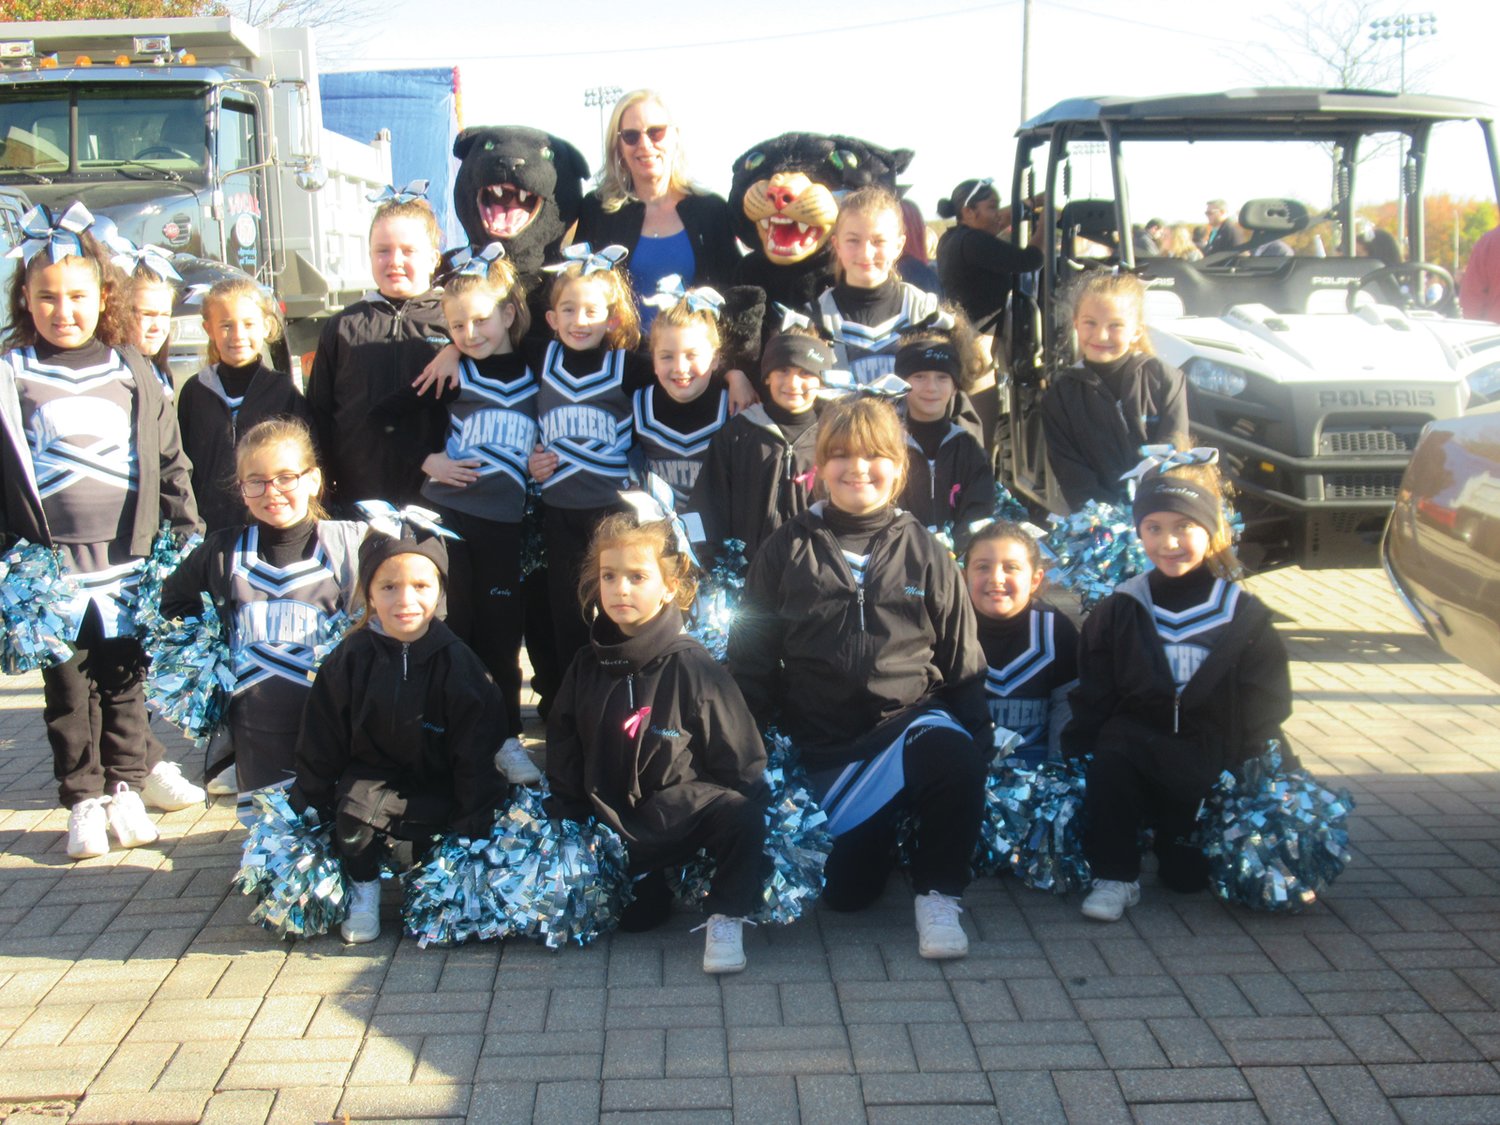 SUPER SPIRIT: Johnston School Committee member Dawn Aloisio is all smiles as she’s surrounding by cheerleaders from the town’s youth football program who marched in the Homecoming Parade along with two Panther mascots.